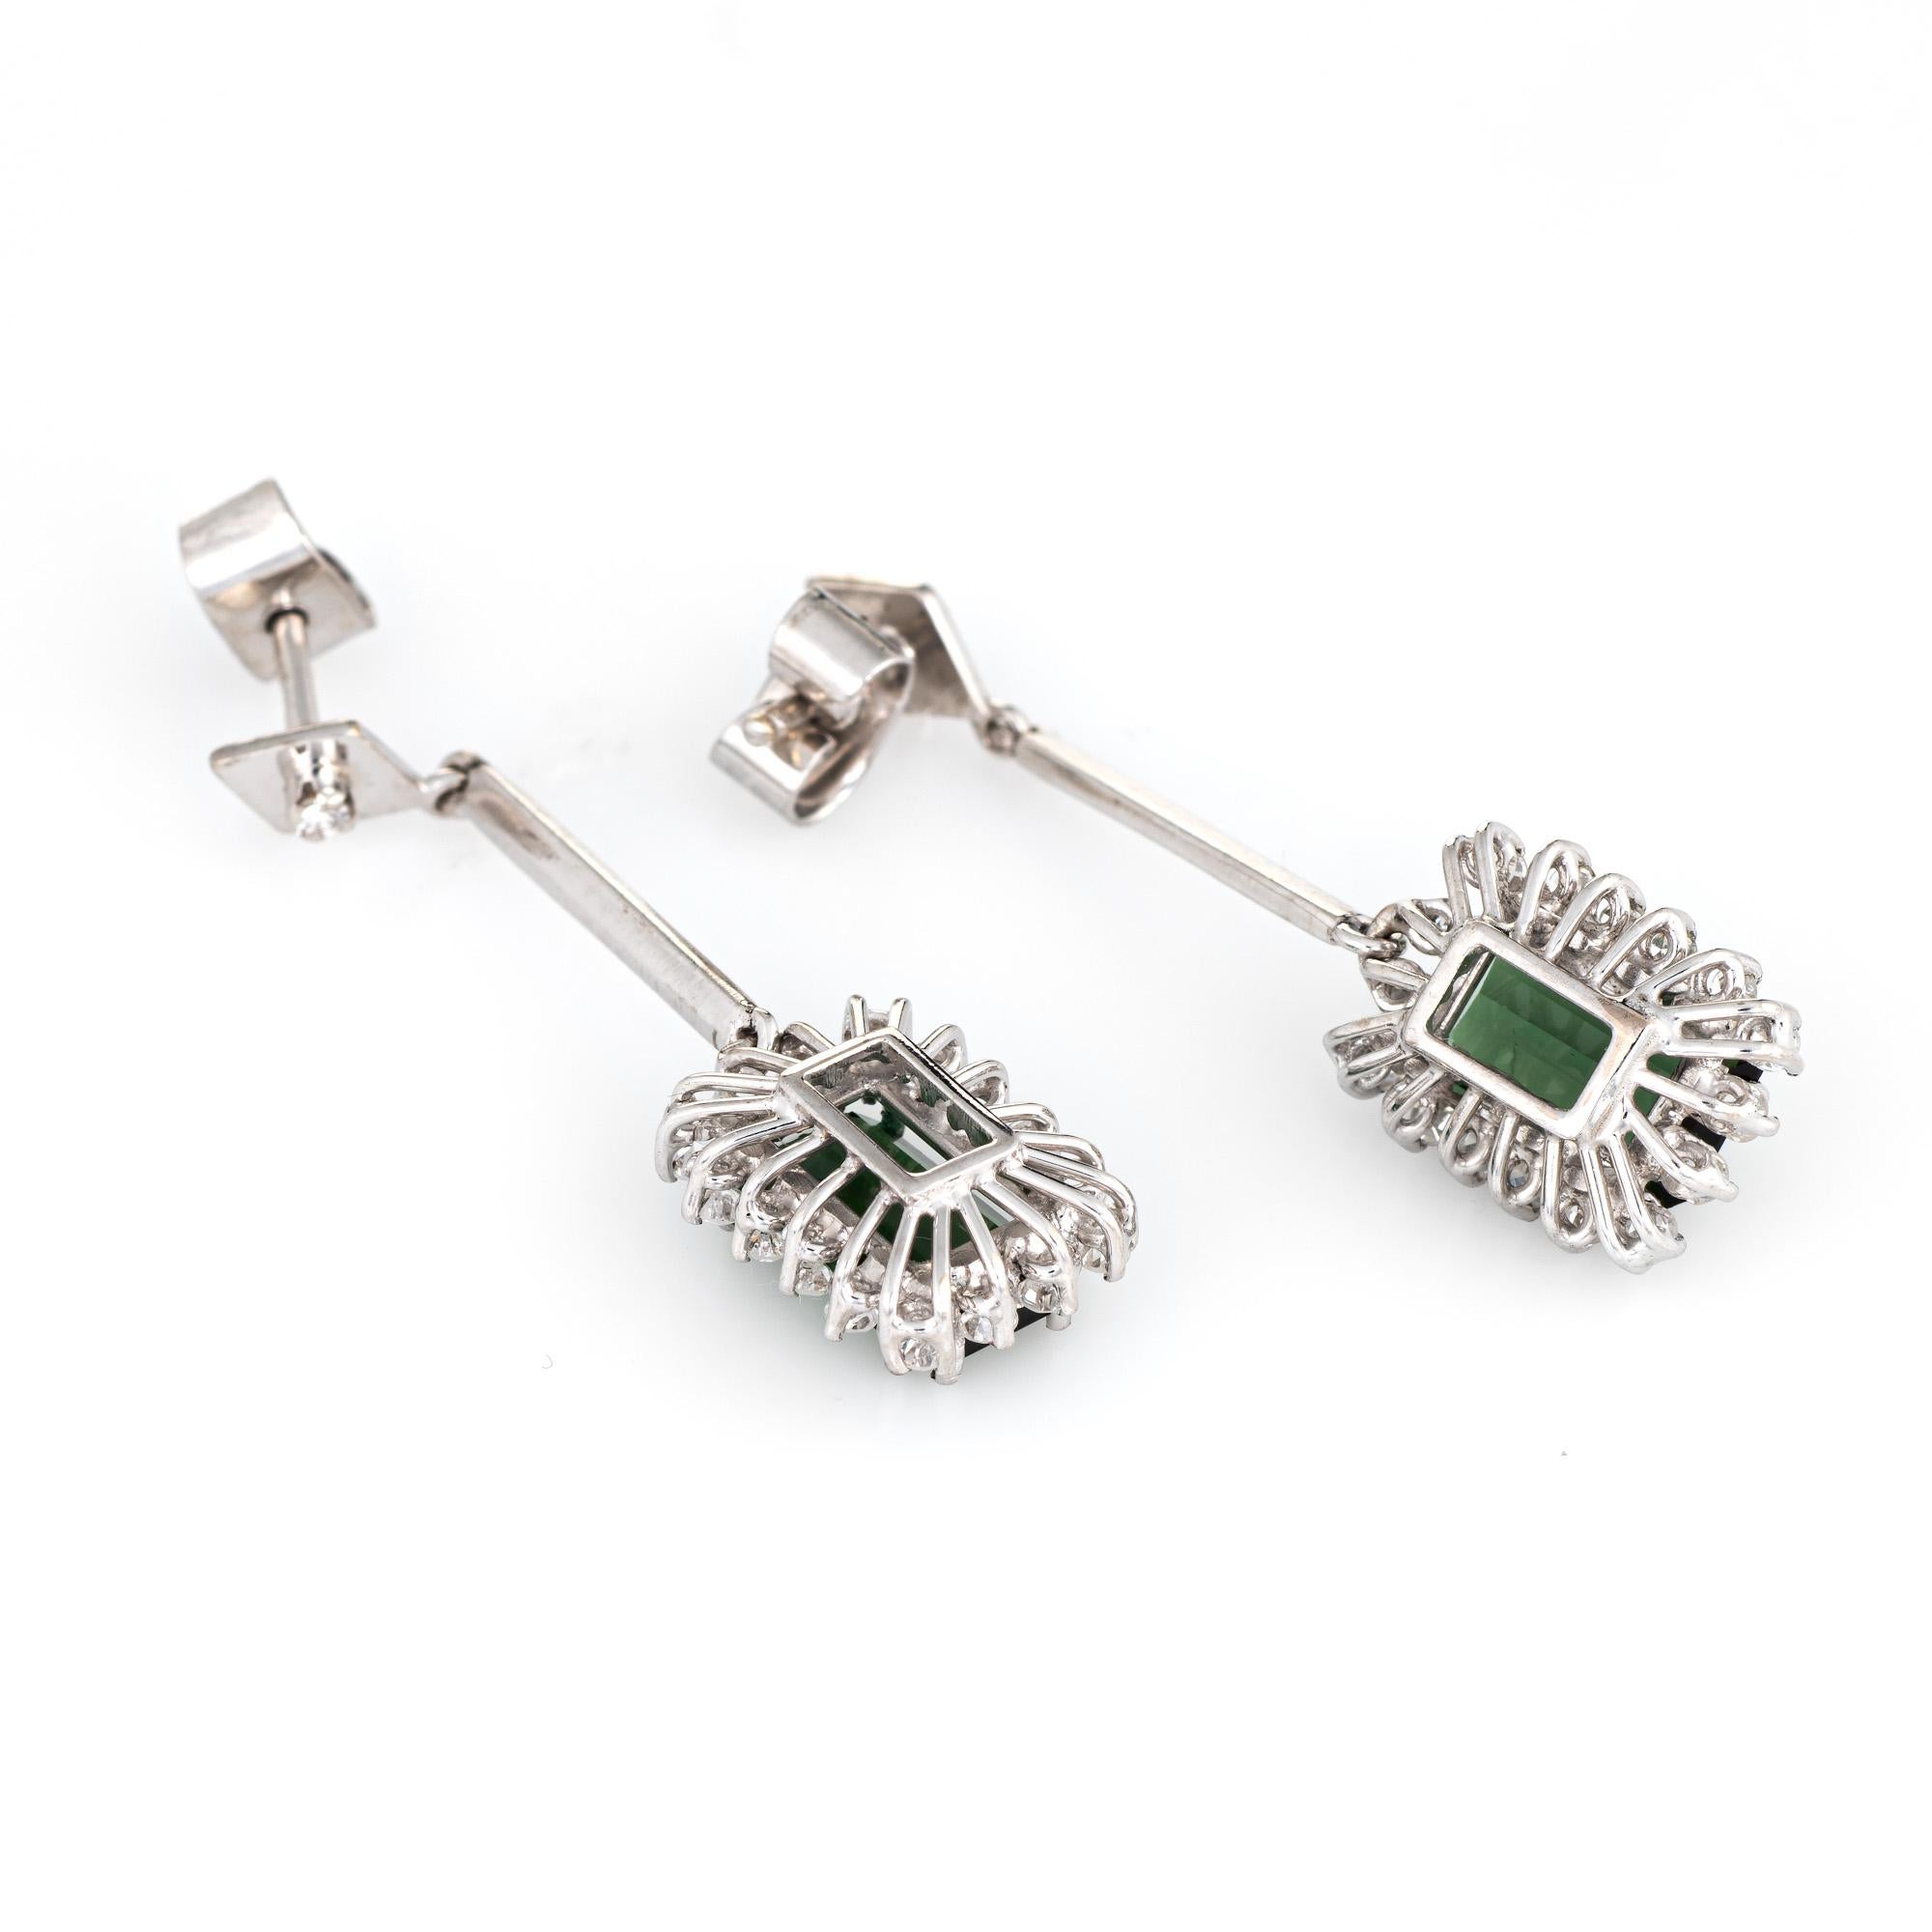 Elegant pair of vintage green tourmaline & diamond drop earrings crafted in 18k white gold. 

Green tourmalines measure 9mm x 5.5mm (estimated at 1.75 carats each - 3.50 carats total estimated weight), accented with an estimated 0.32 carats of